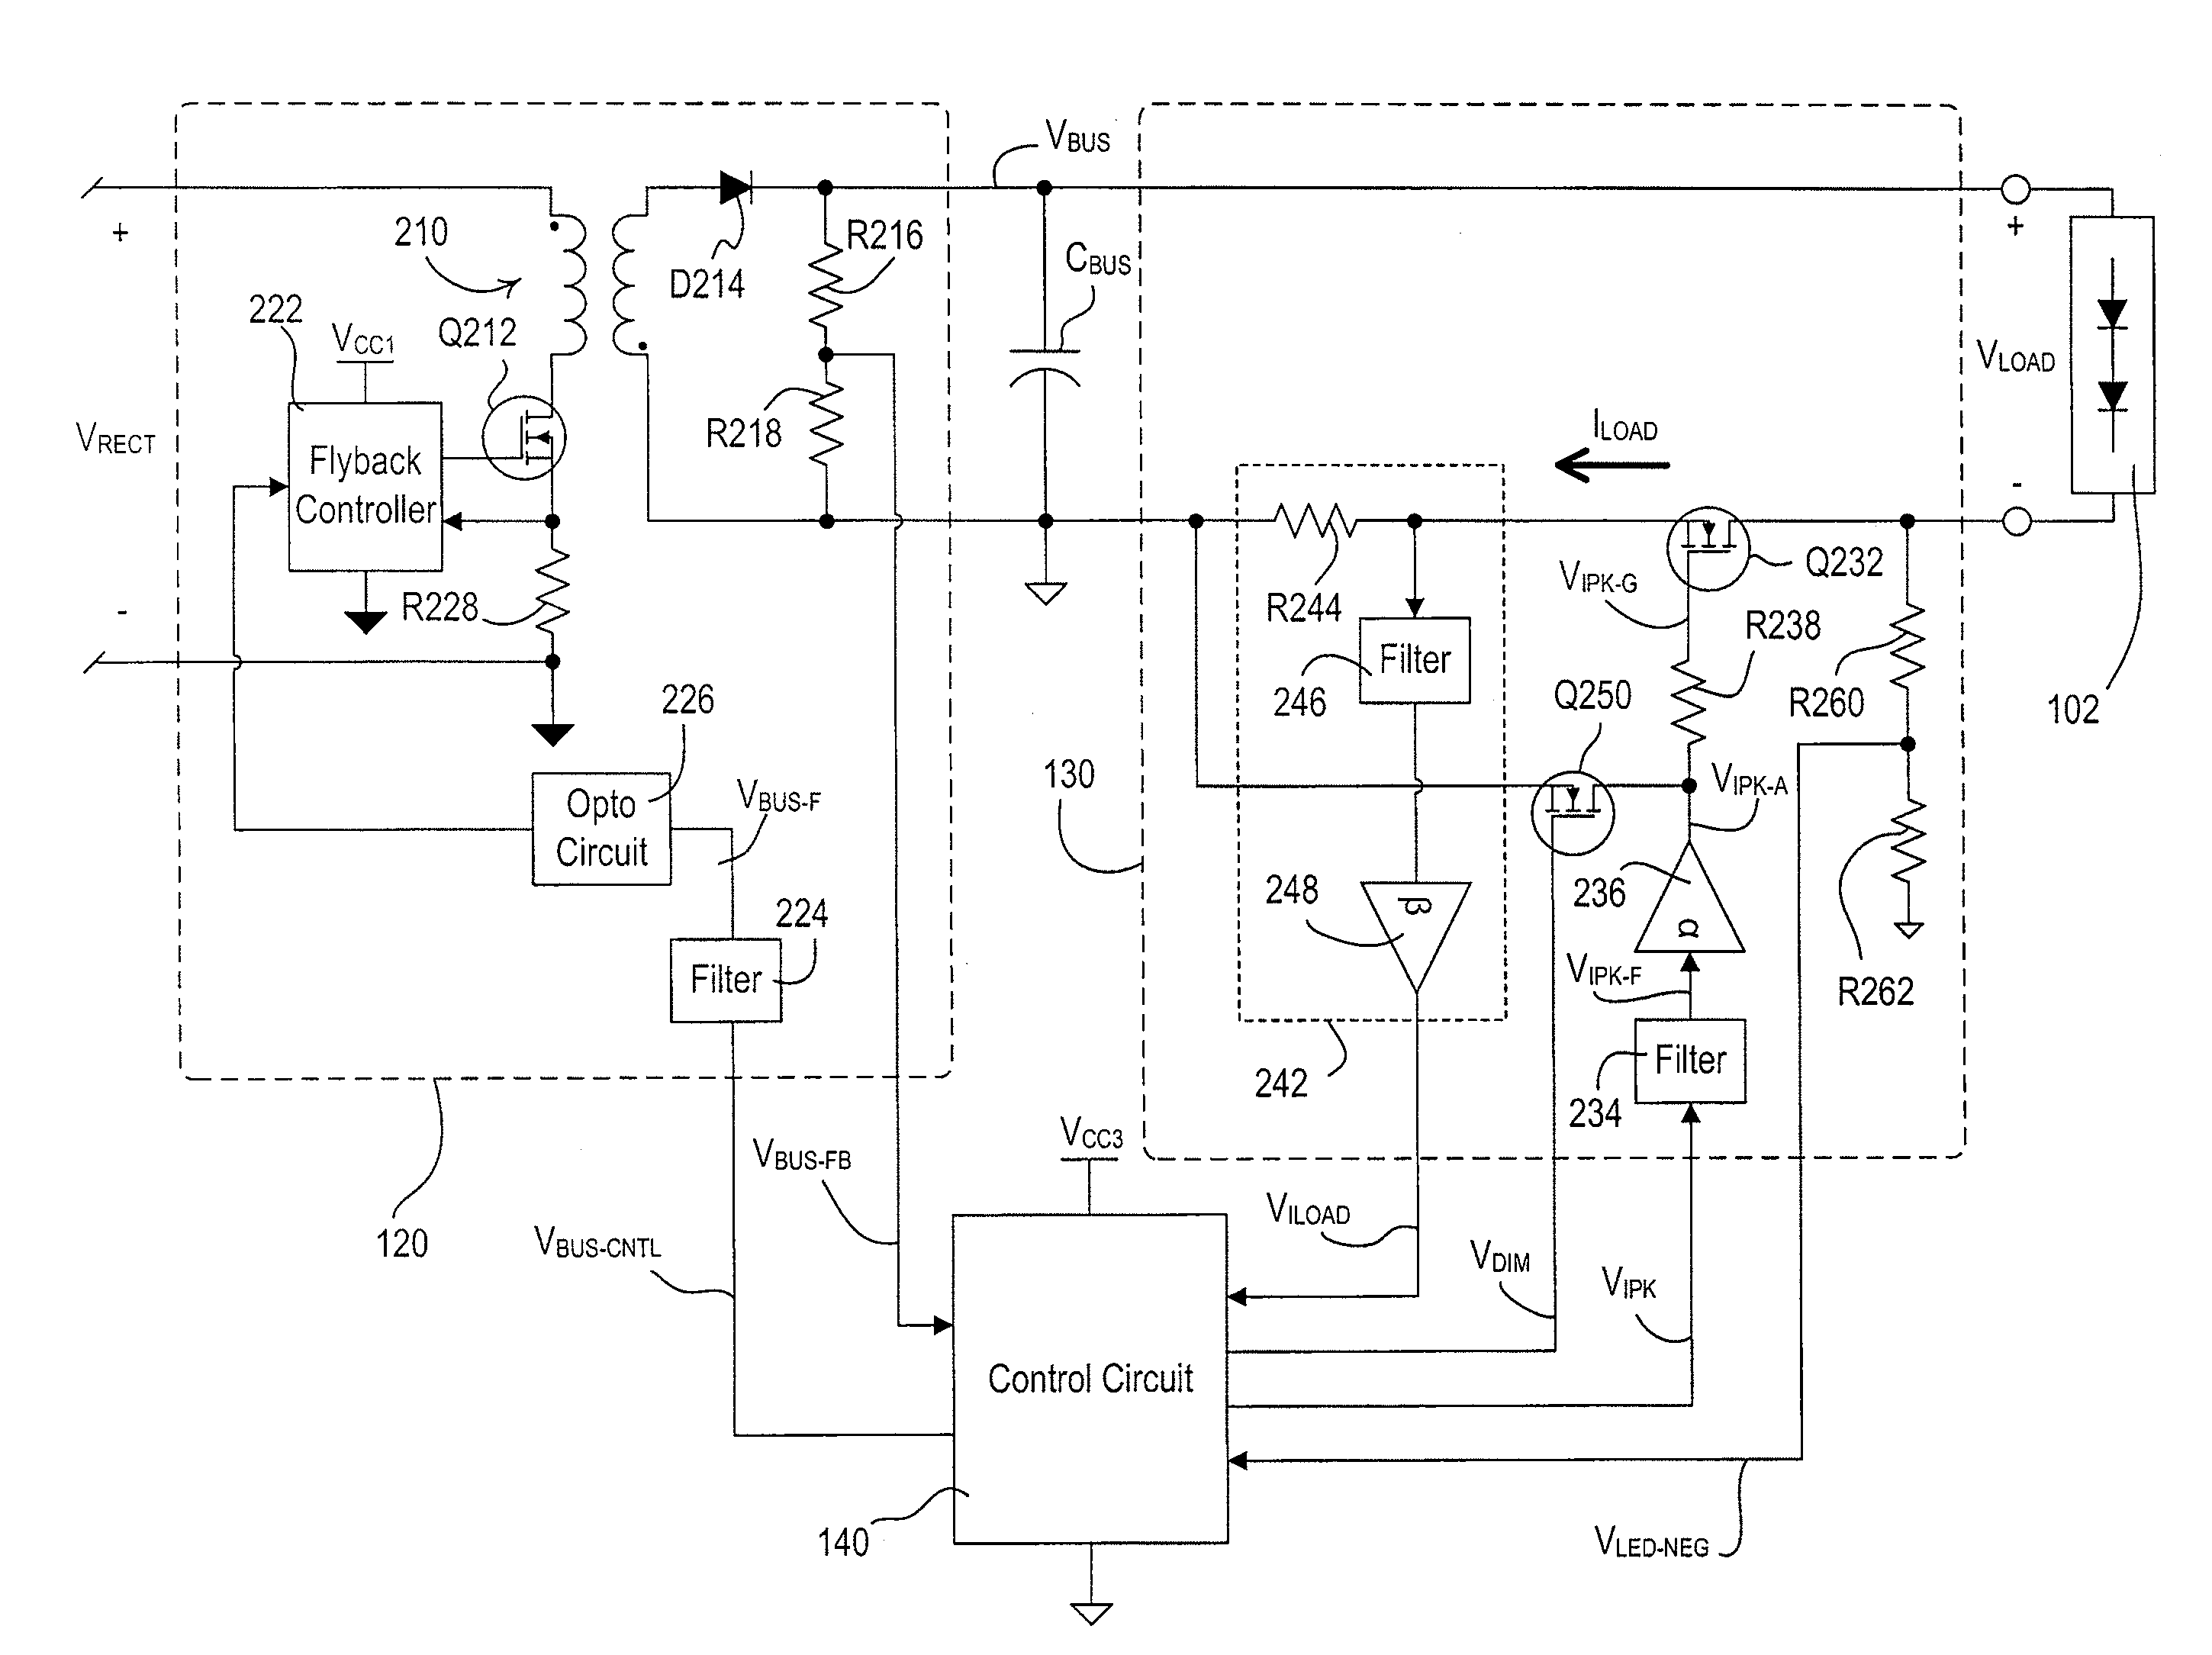 Power converter for a configurable light-emitting diode driver